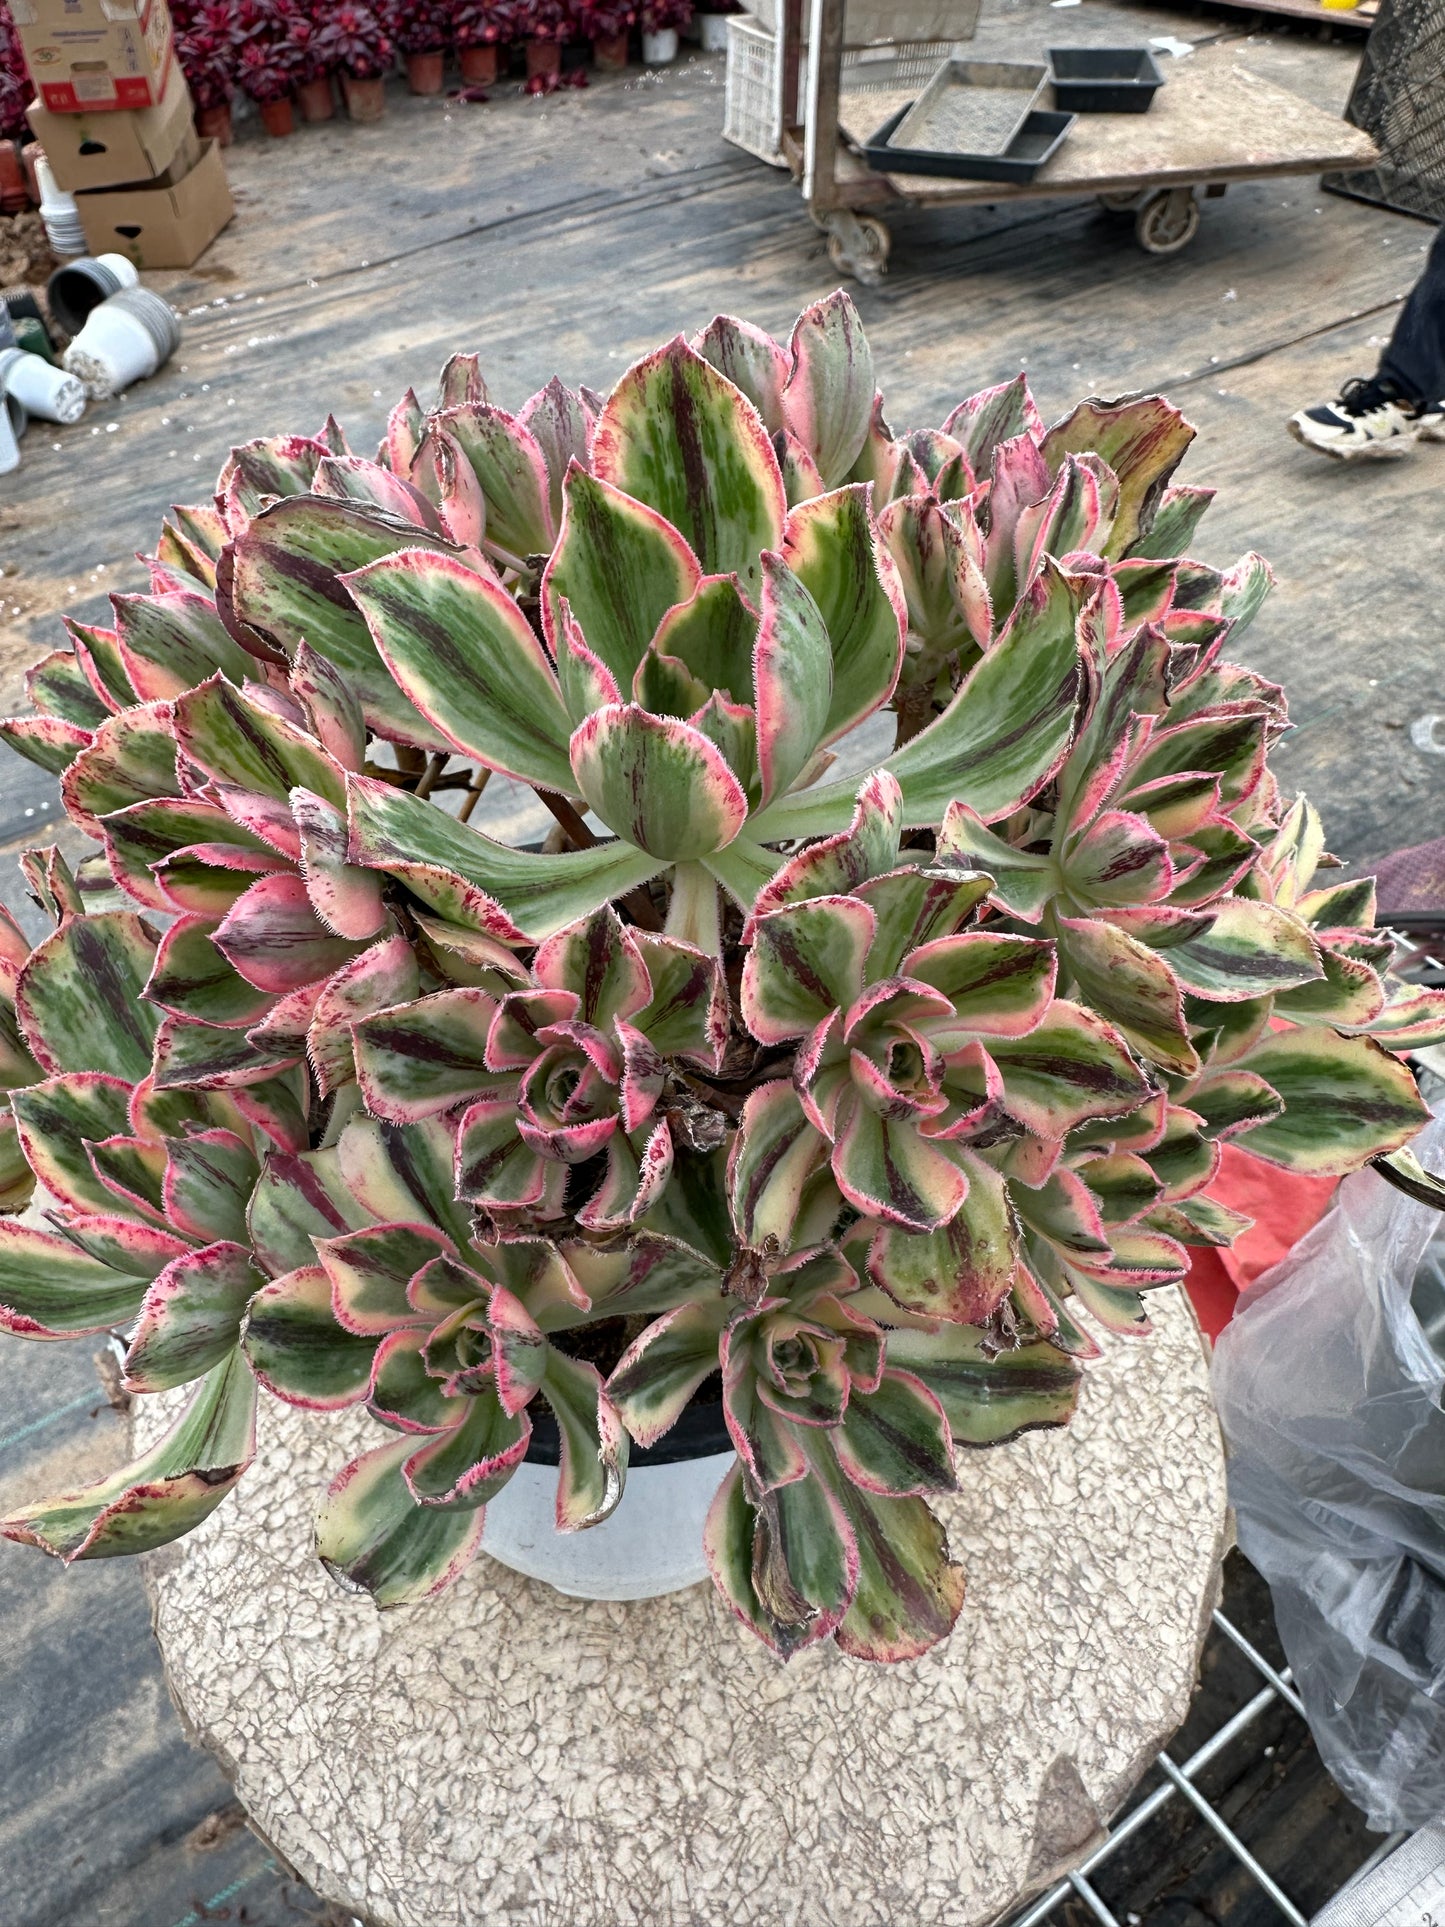 Red Fuji cluster18-25cm Old pile/ 10-20 heads/ Aeonium cluster / Variegated Natural Live Plants Succulents